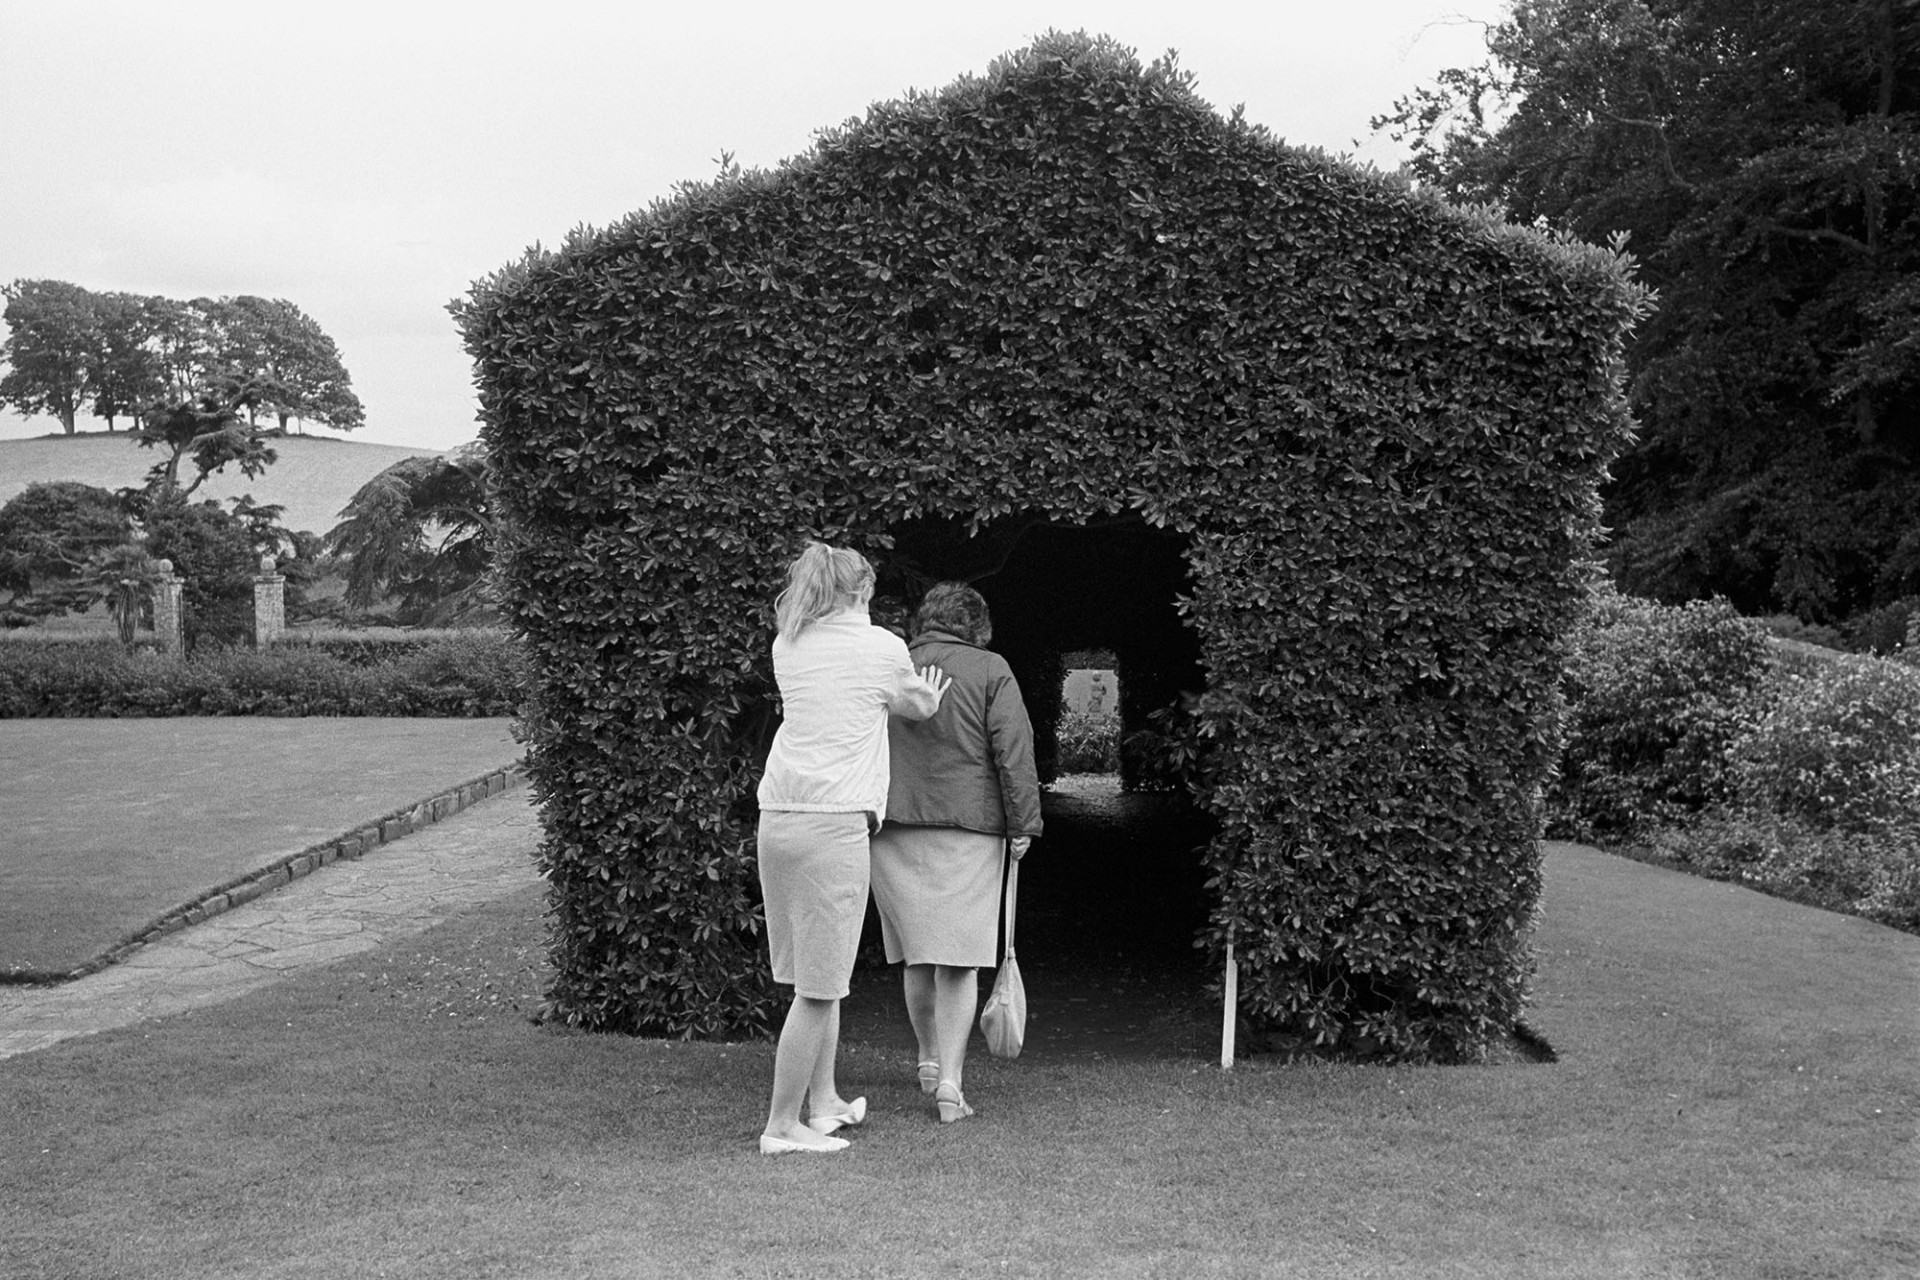 Tree house in park of stately home, girl pushing woman into tunnel cut through centre. 
[A girl and woman at Tapely Park stately home and garden at Instow. The girl is pushing the woman into a tree house in the park or garden.]